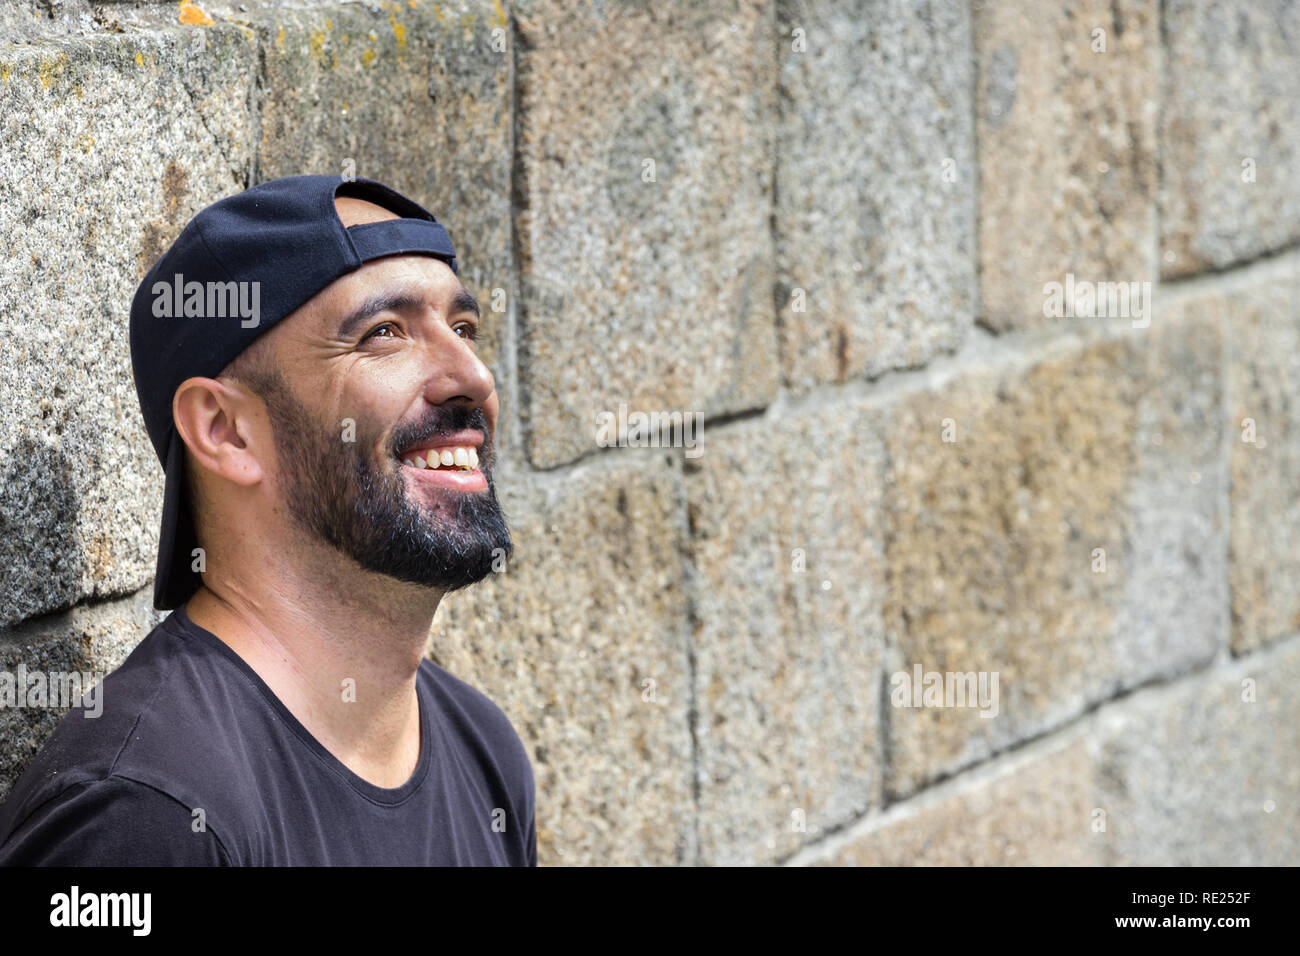 Portrait of a man with beard leaning on a stone wall, smiling, happy, dreaming, looking up away. Stock Photo